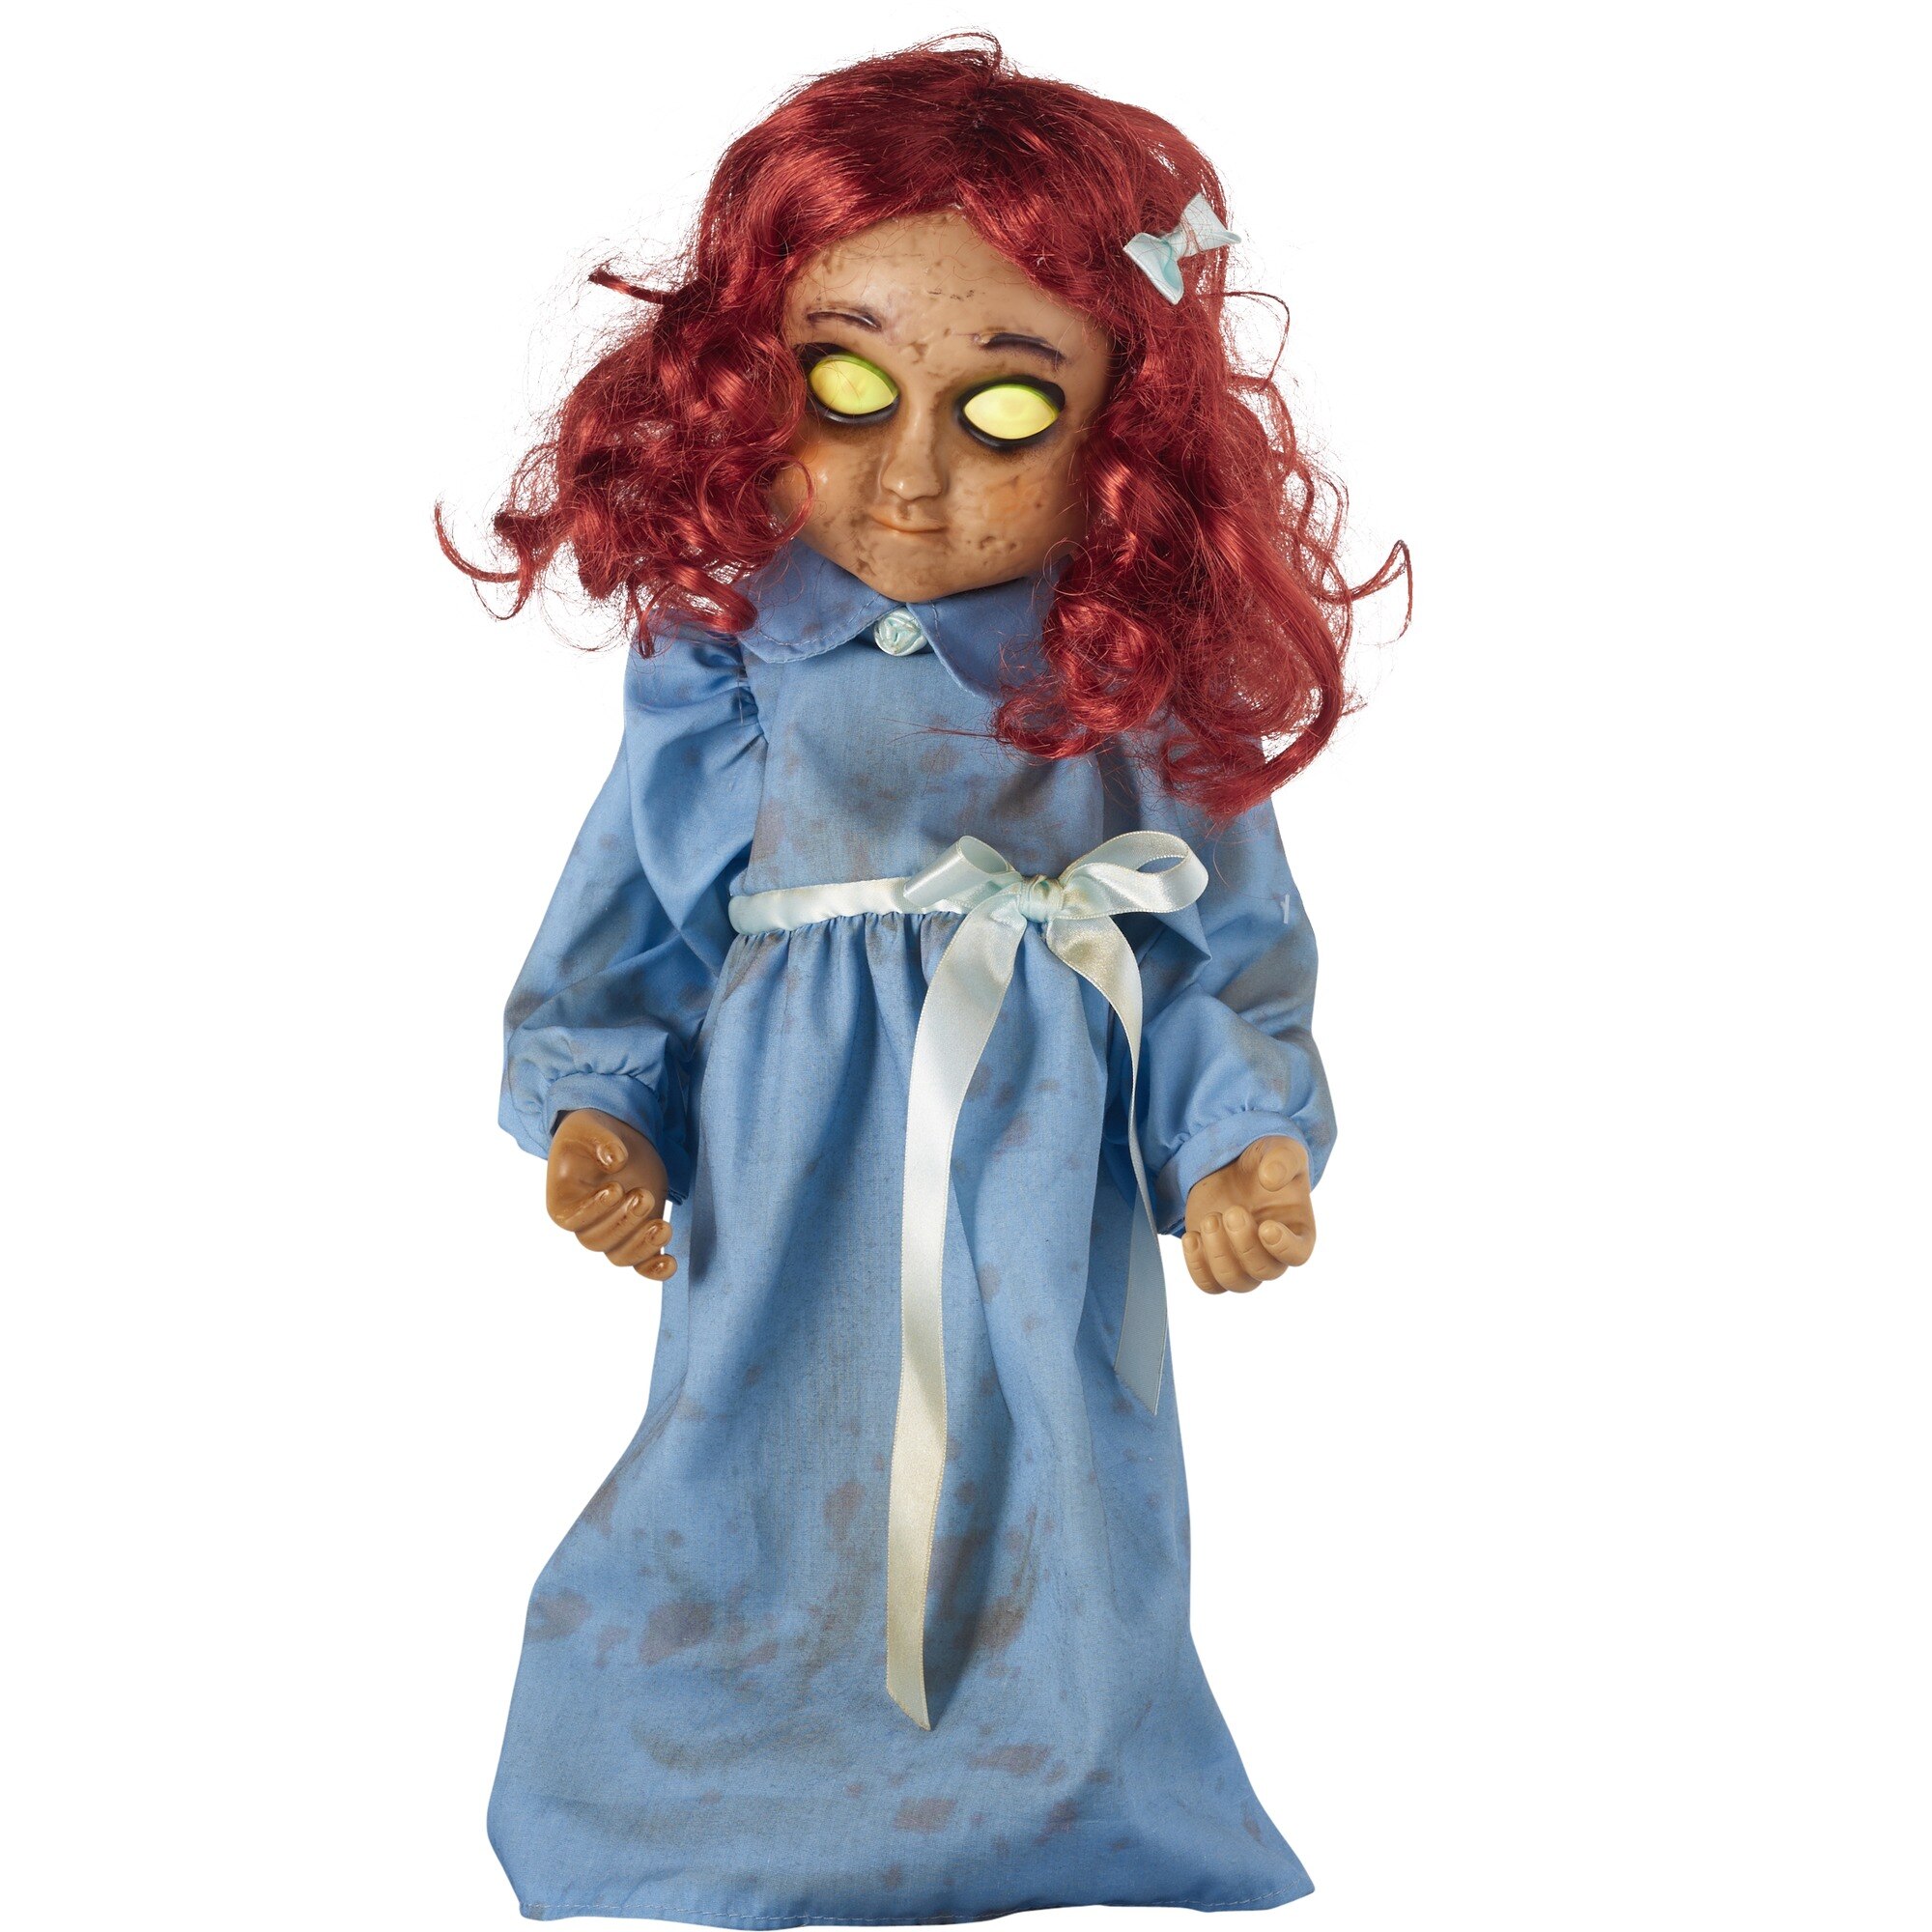 Spooky Village Animated Spooky Doll, 18 in